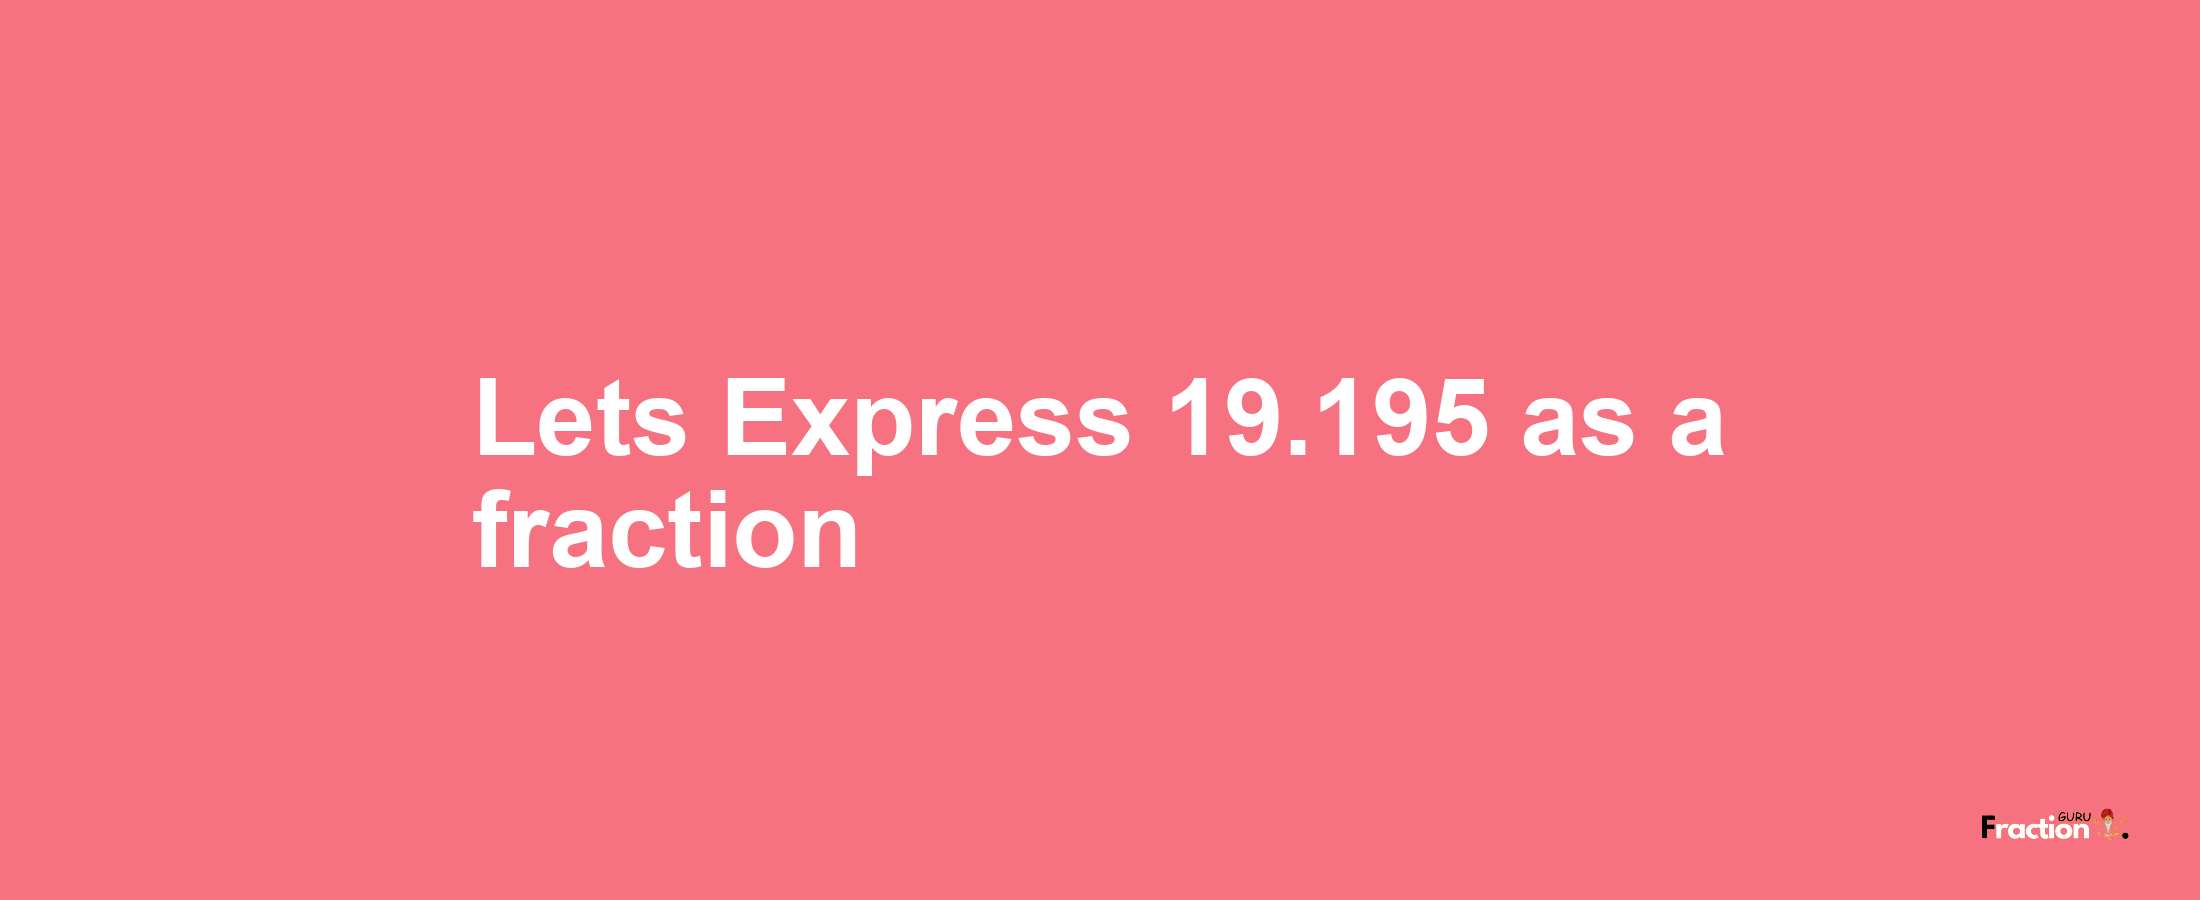 Lets Express 19.195 as afraction